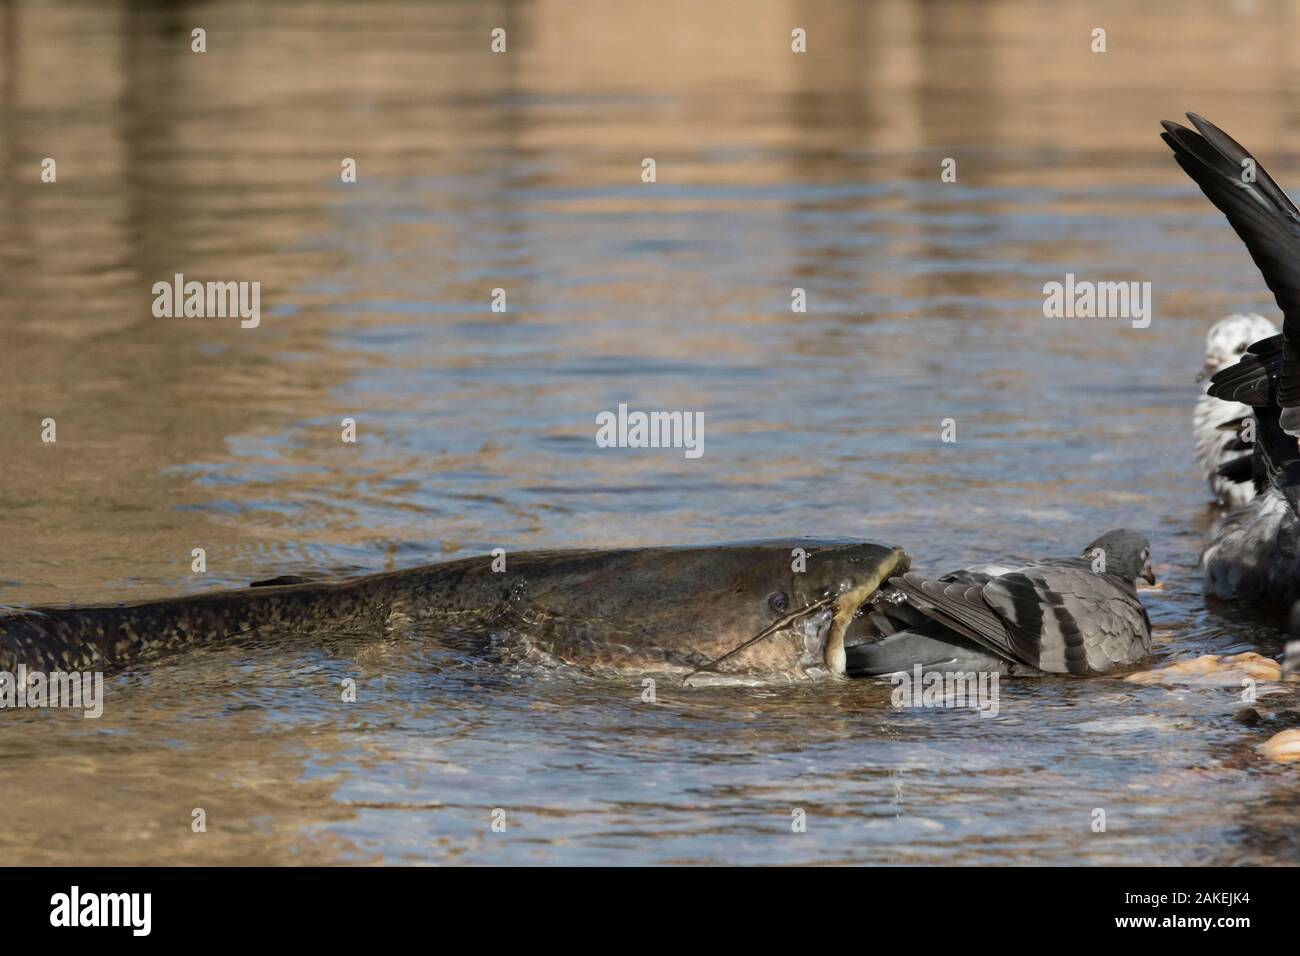 Wels catfish (Silurus glanis) catching Feral pigeon (Columba livia) by lunging on the riverbank, Tarn River, France August Stock Photo